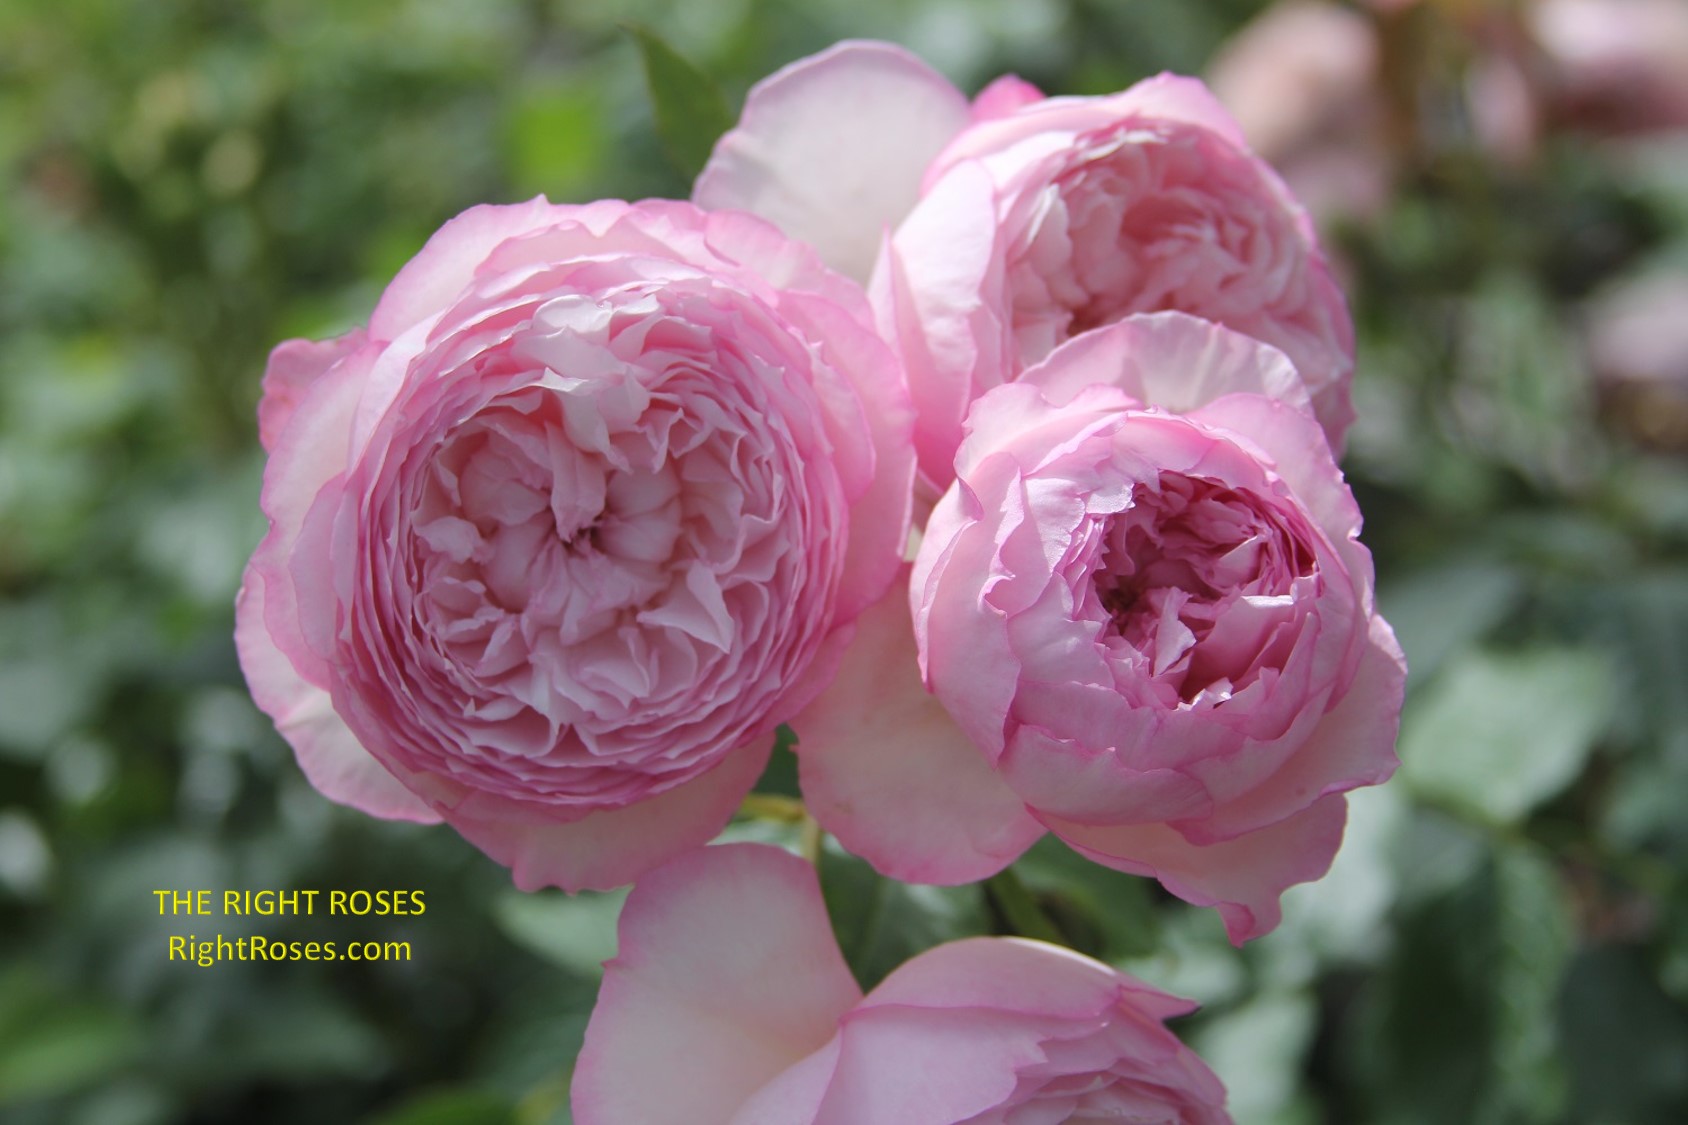 the mill on the floss rose review the right roses score best top garden store david austin english roses rose products rose rating the right leap rose food fertilizer